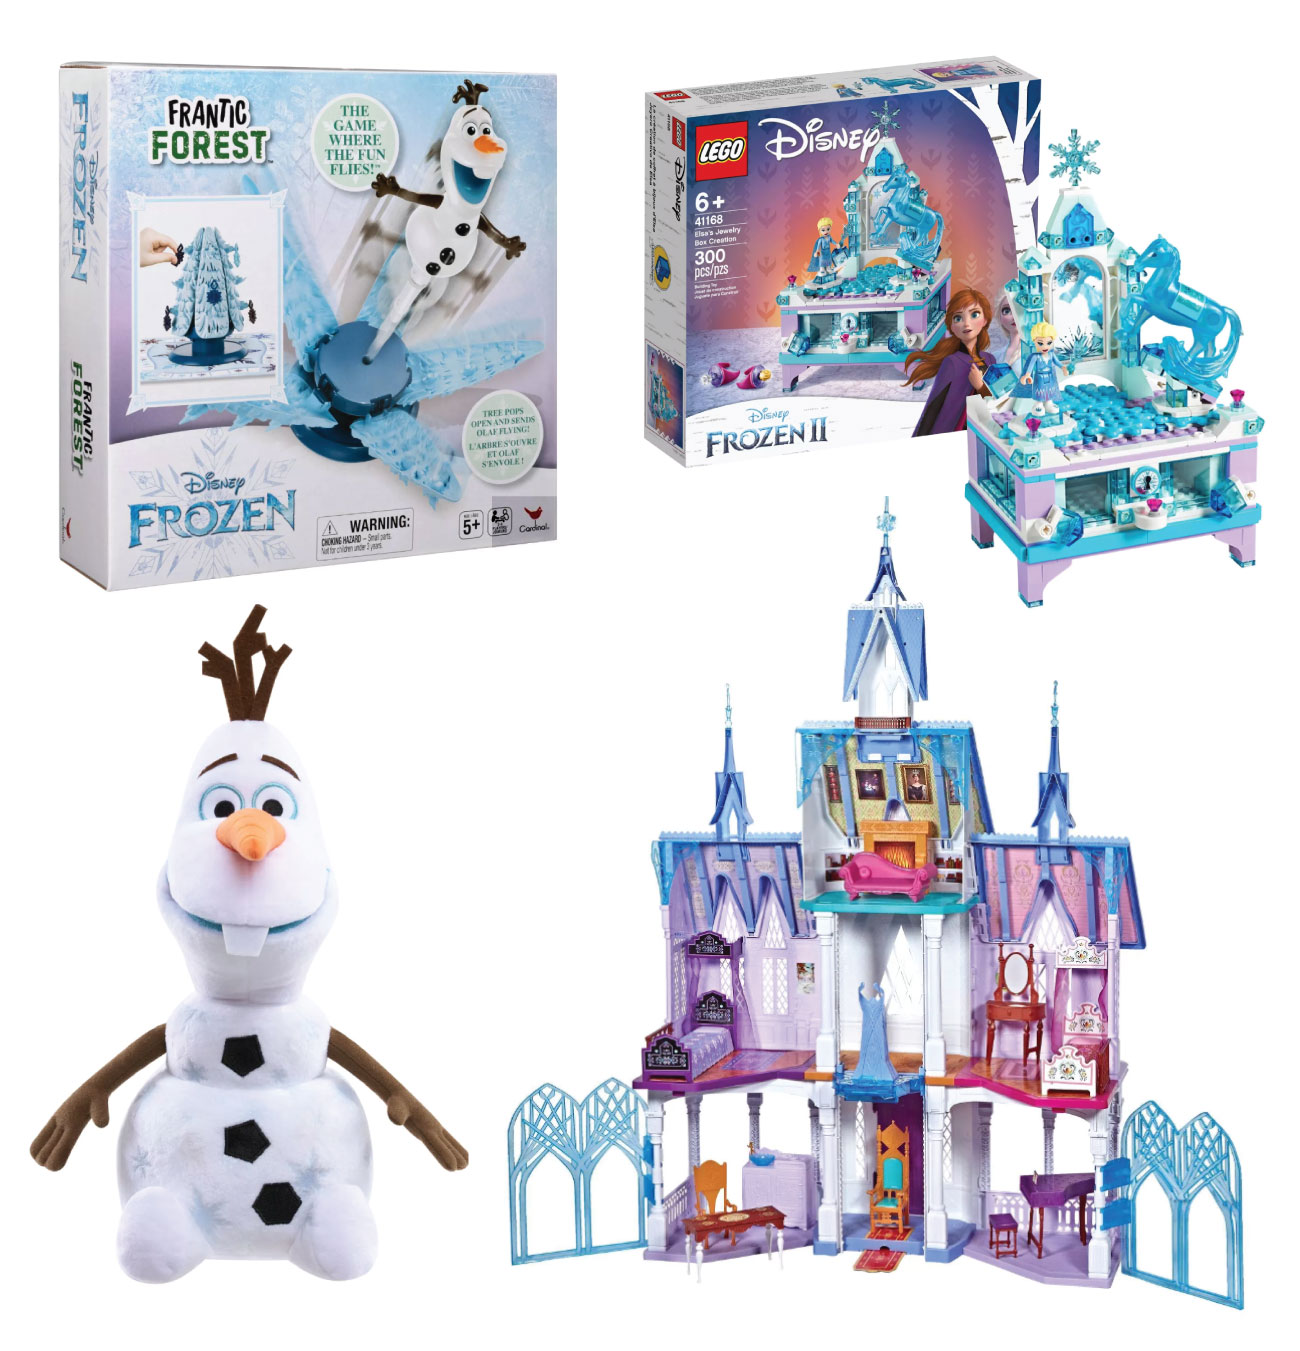 Three Disney Frozen 2 gift sets and an Olaf plush doll